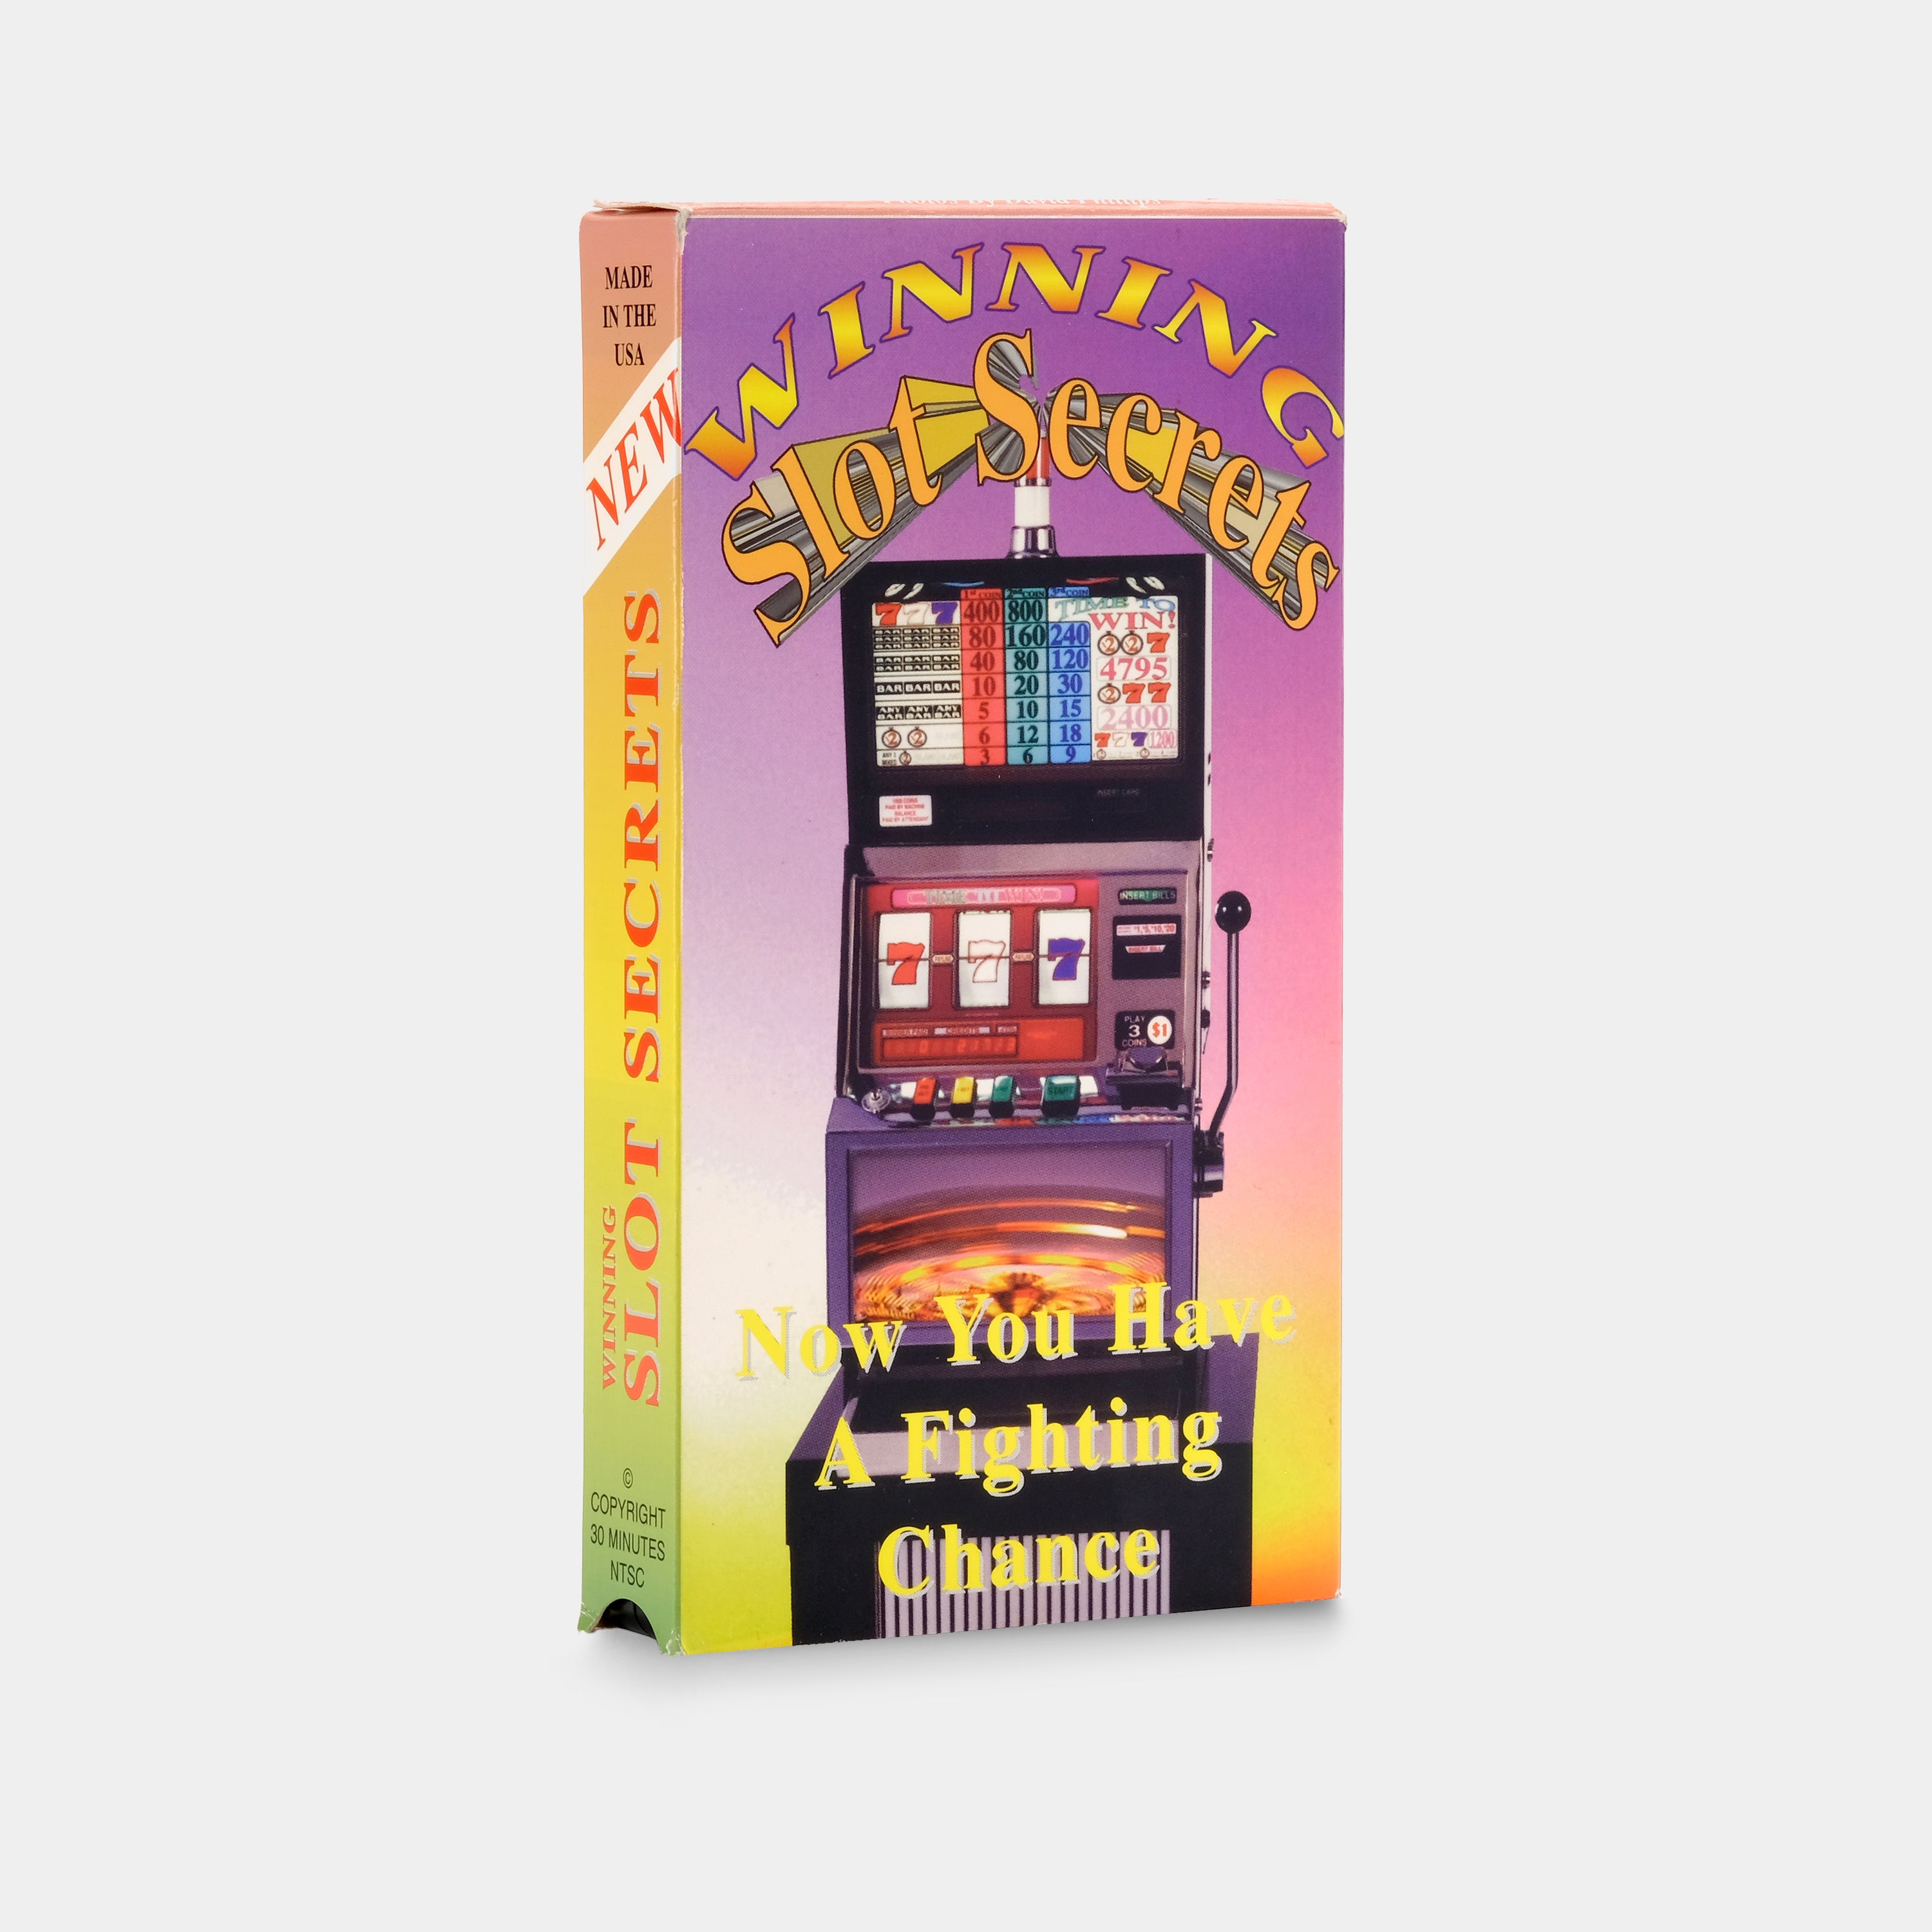 Winning Slot Secrets: Now You Have A Fighting Chance VHS Tape